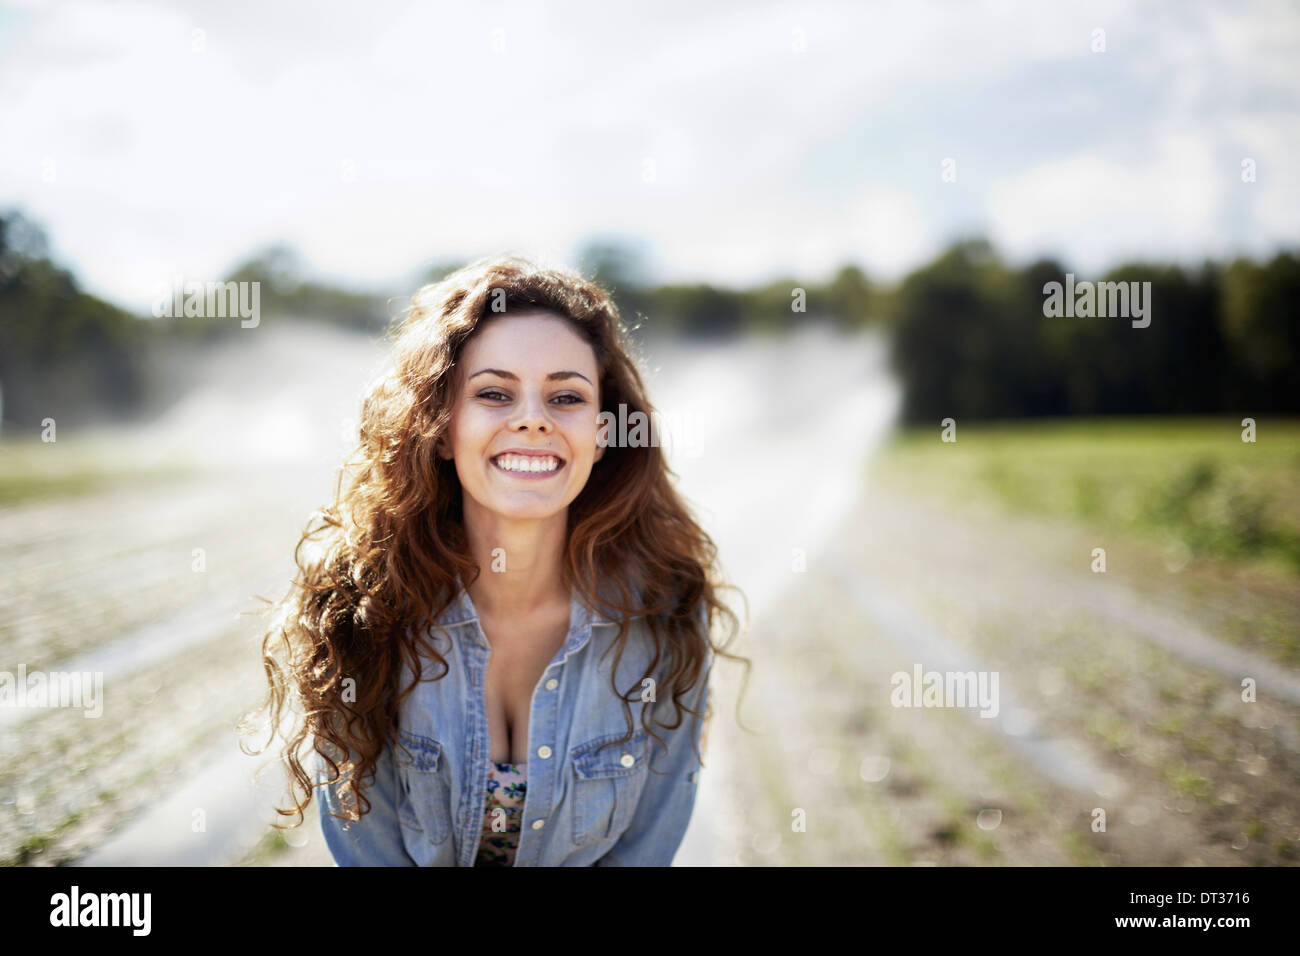 A young woman in denim jacket standing in a field irrigation sprinklers working in the background Stock Photo